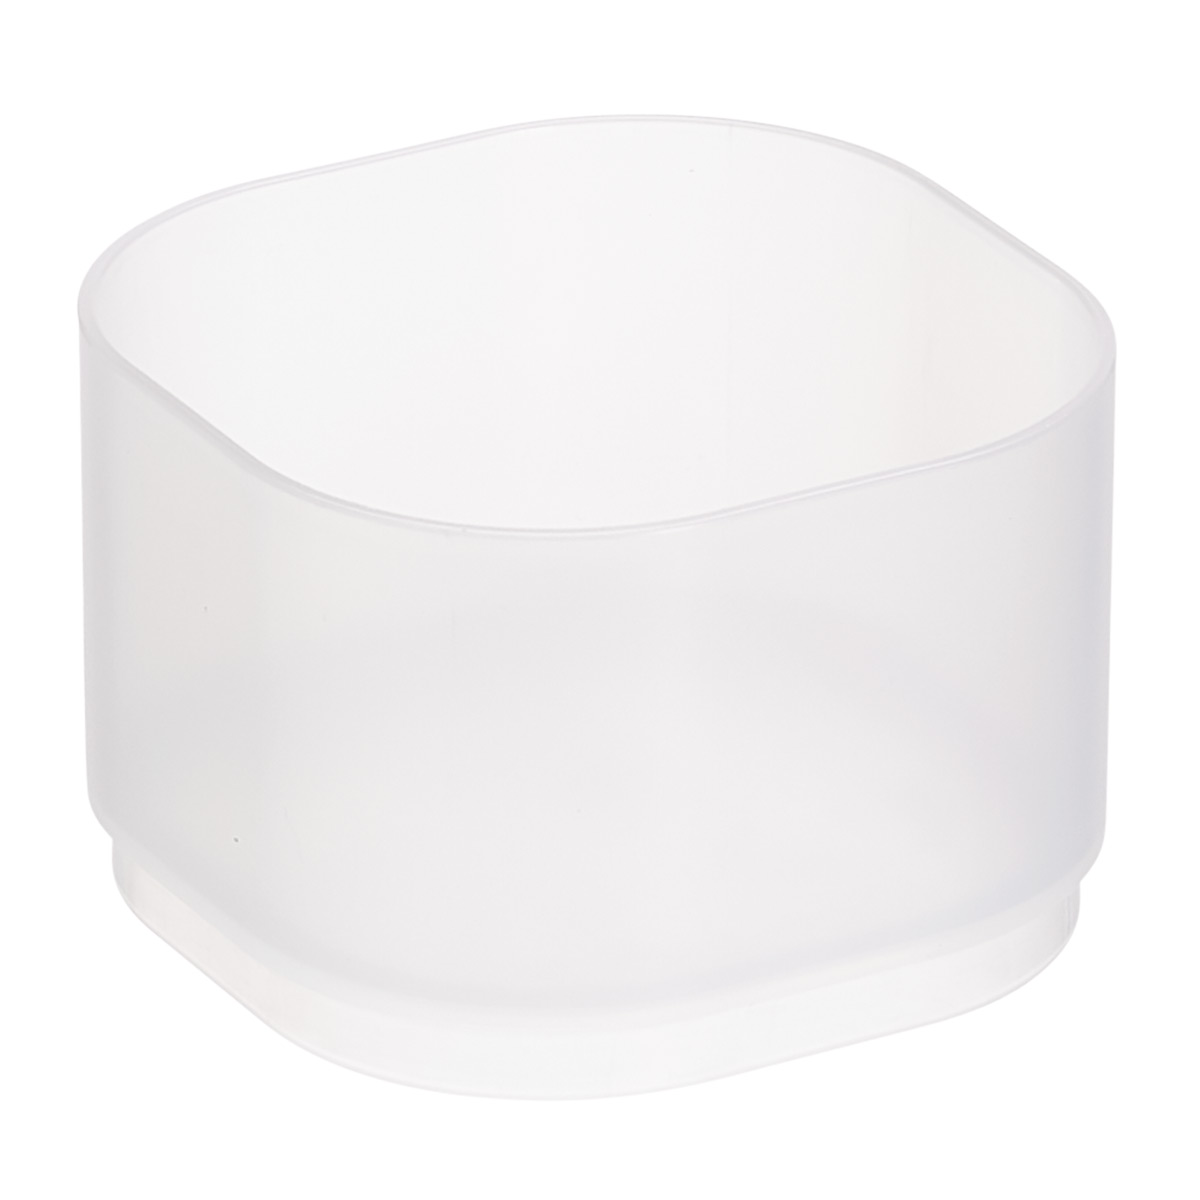 https://www.containerstore.com/catalogimages/390248/10080894-shimo-deep-small-stacking-t.jpg